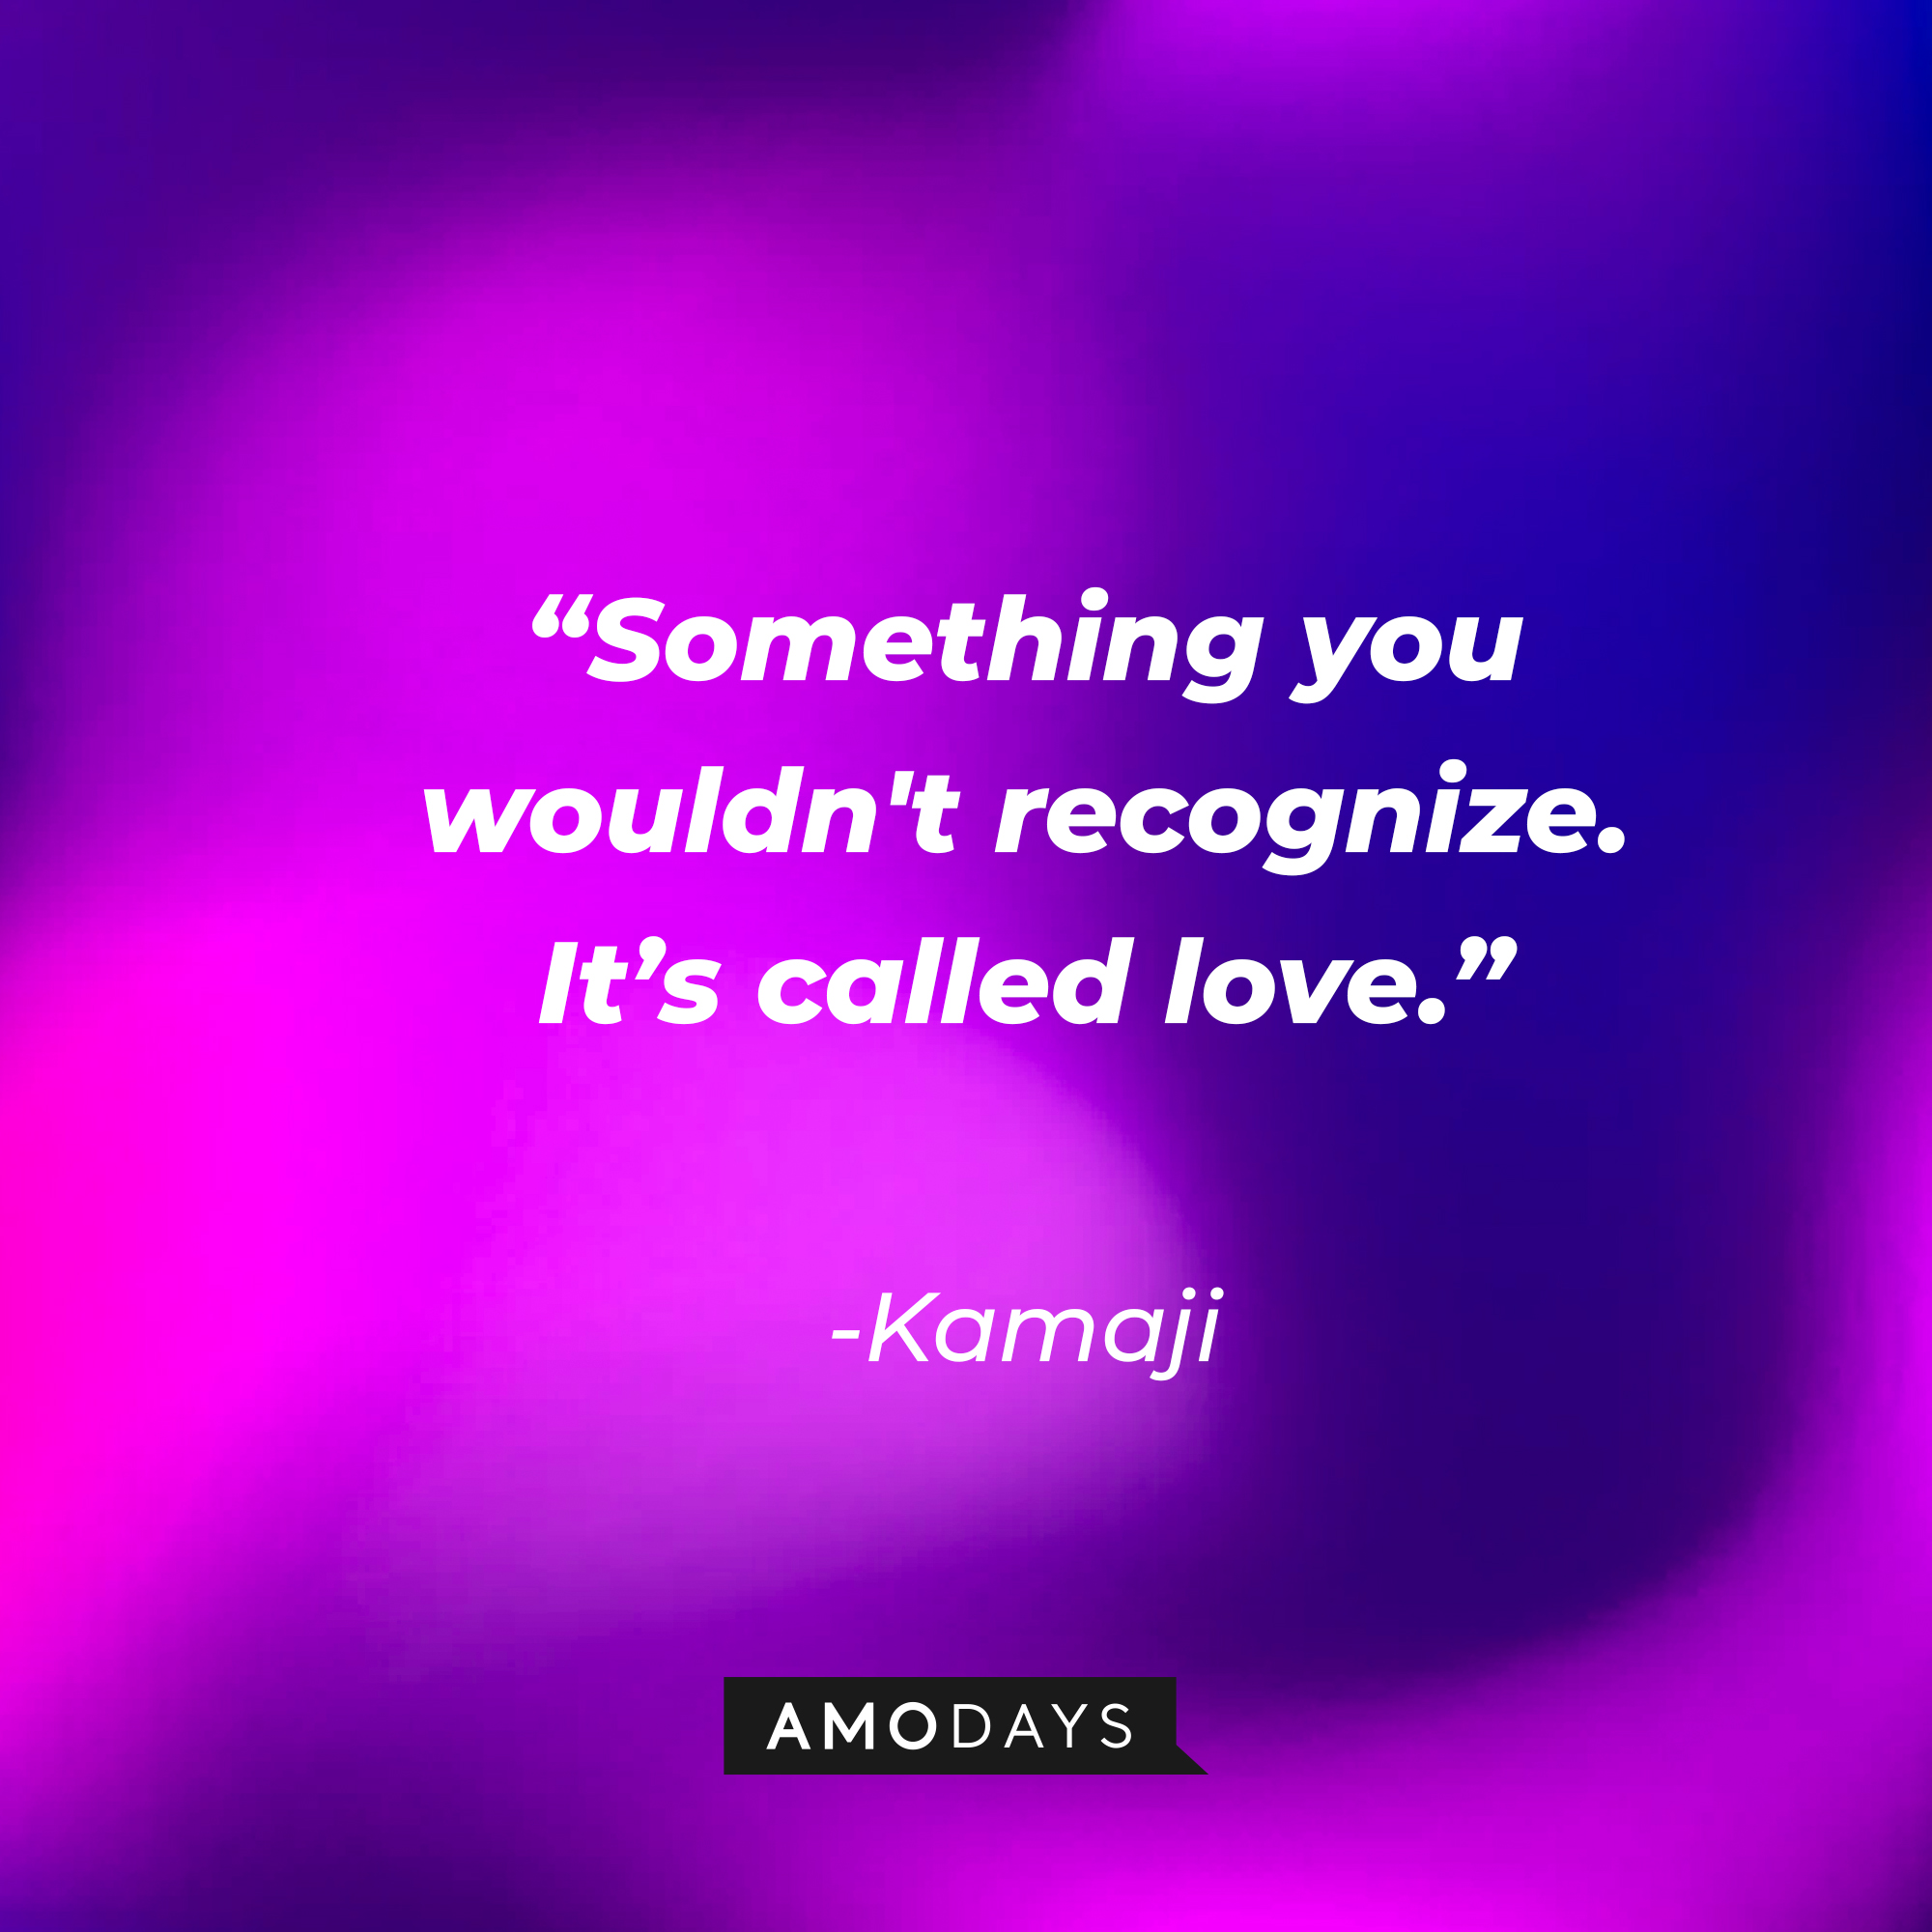 Kamaji’s quote: "Something you wouldn't recognize. It’s called love." | Source: AmoDays